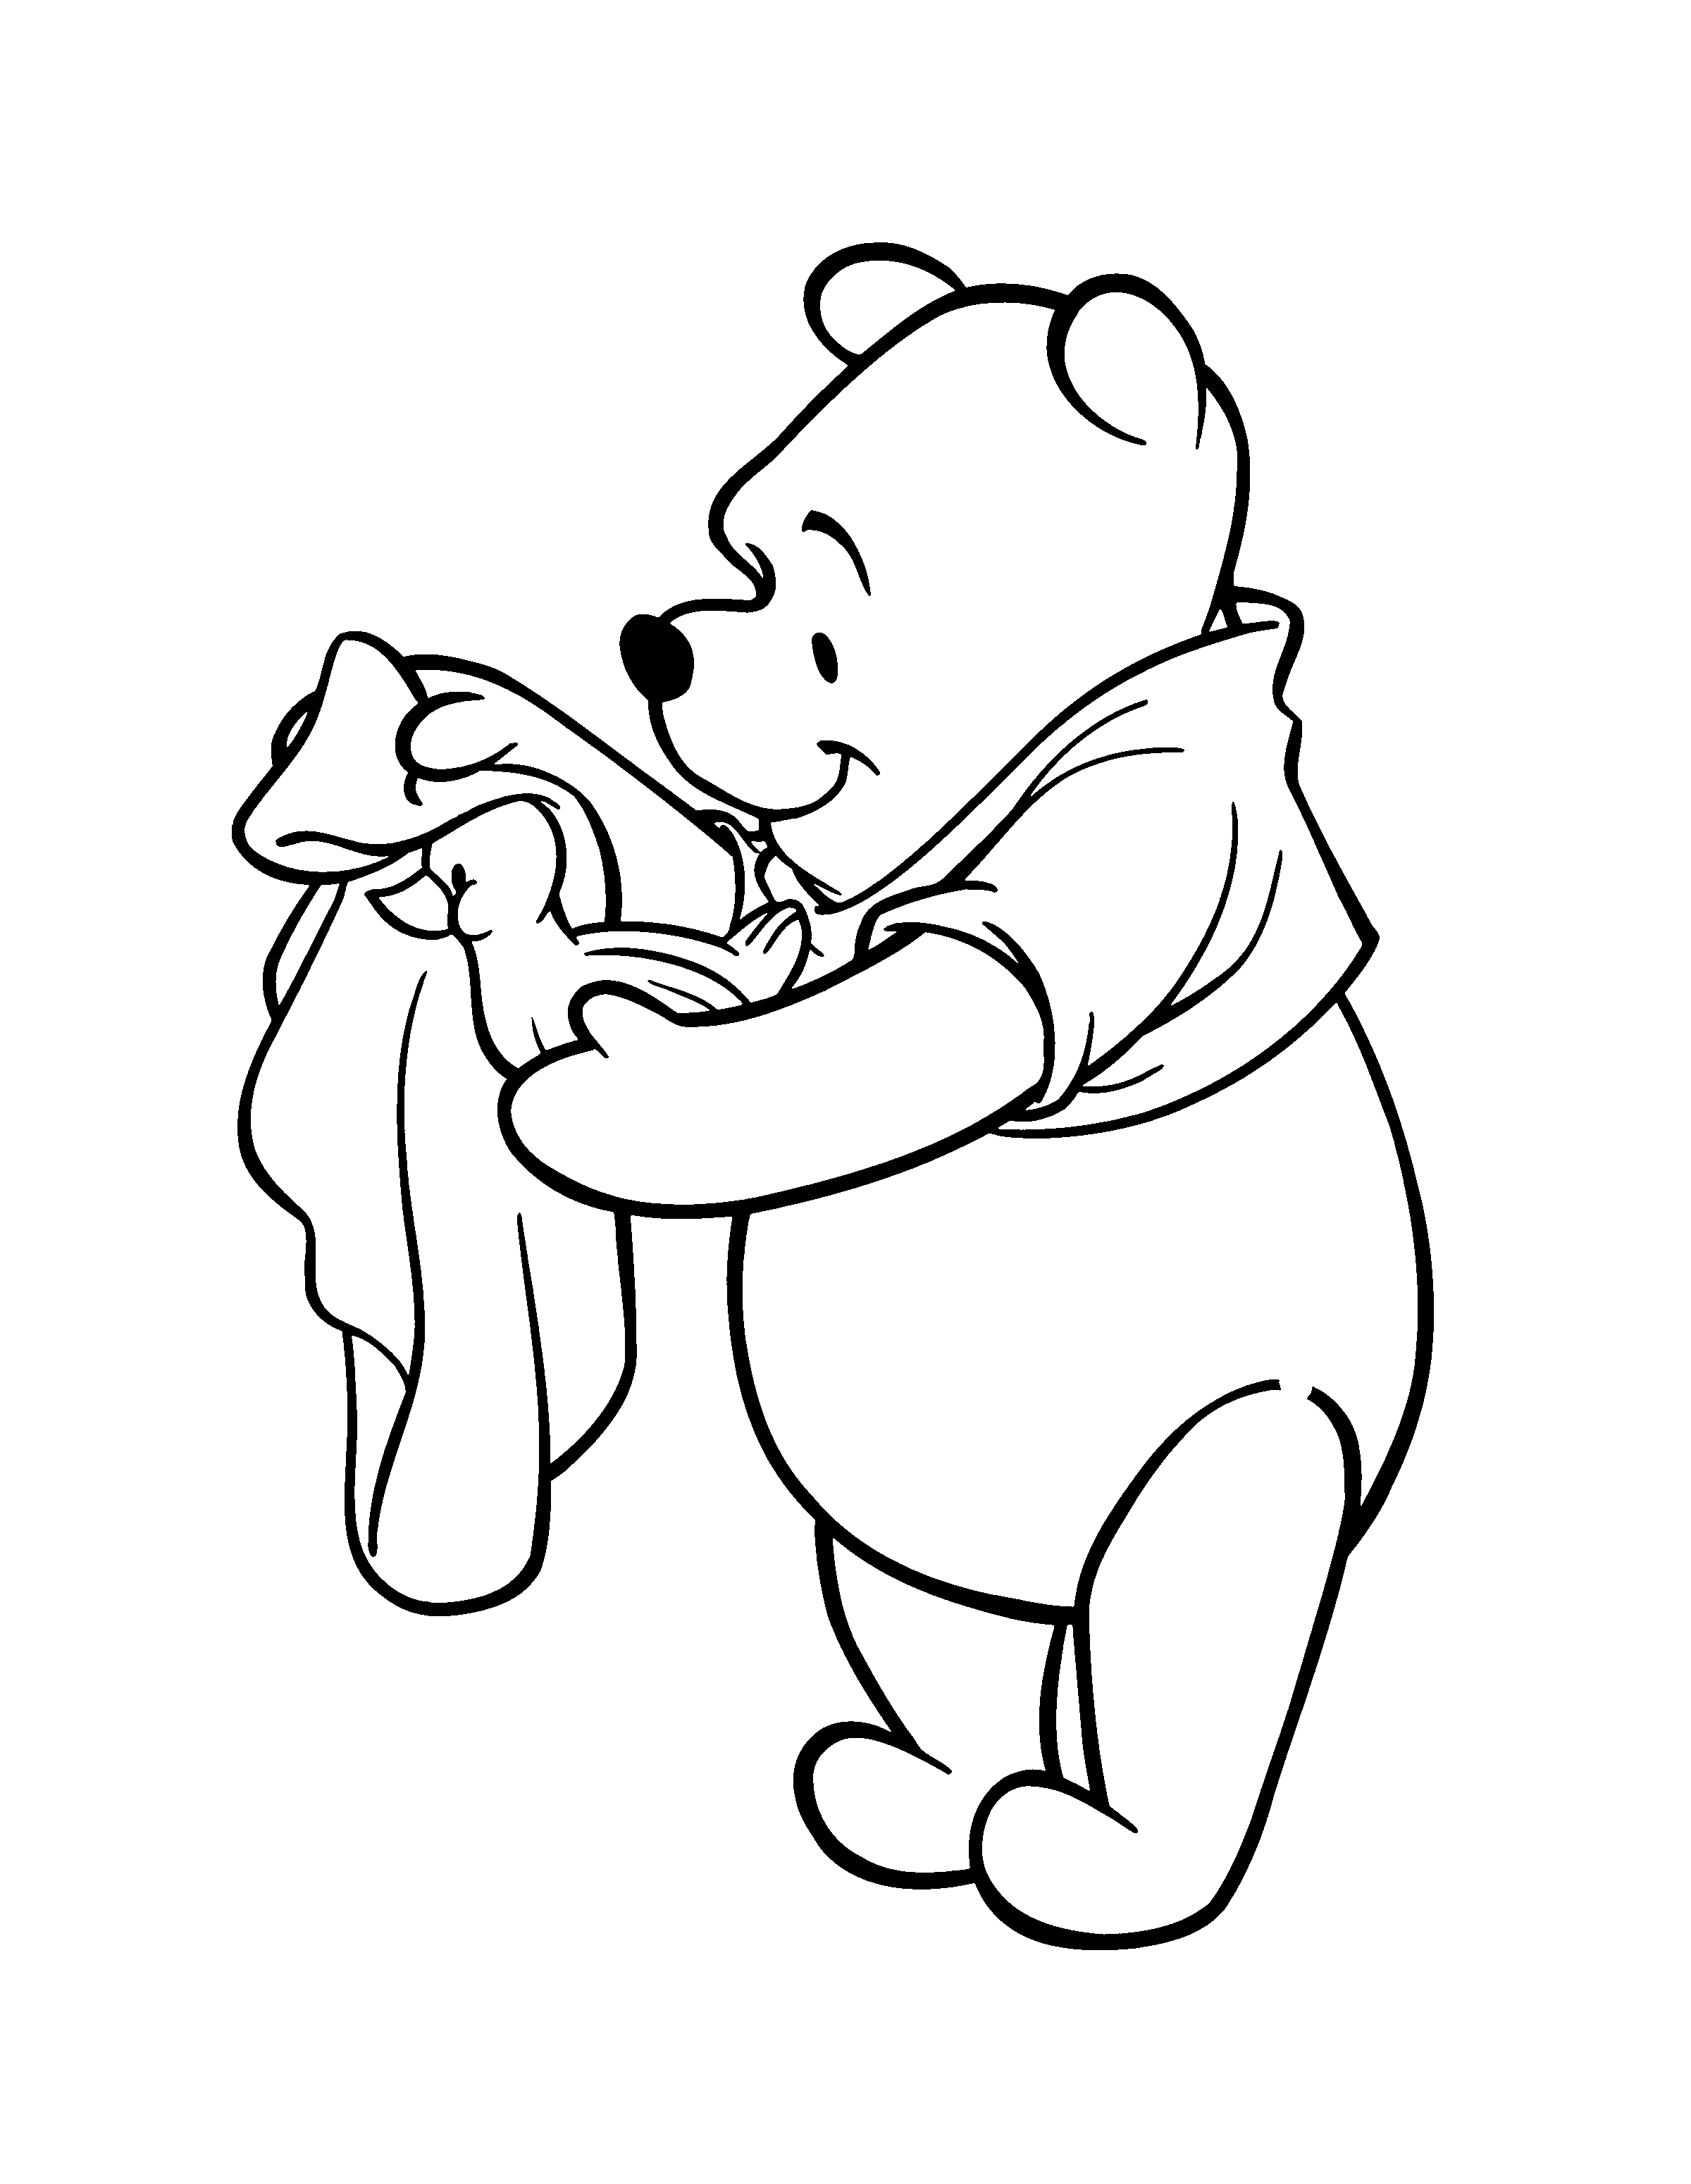 animated-coloring-pages-winnie-the-pooh-image-0120